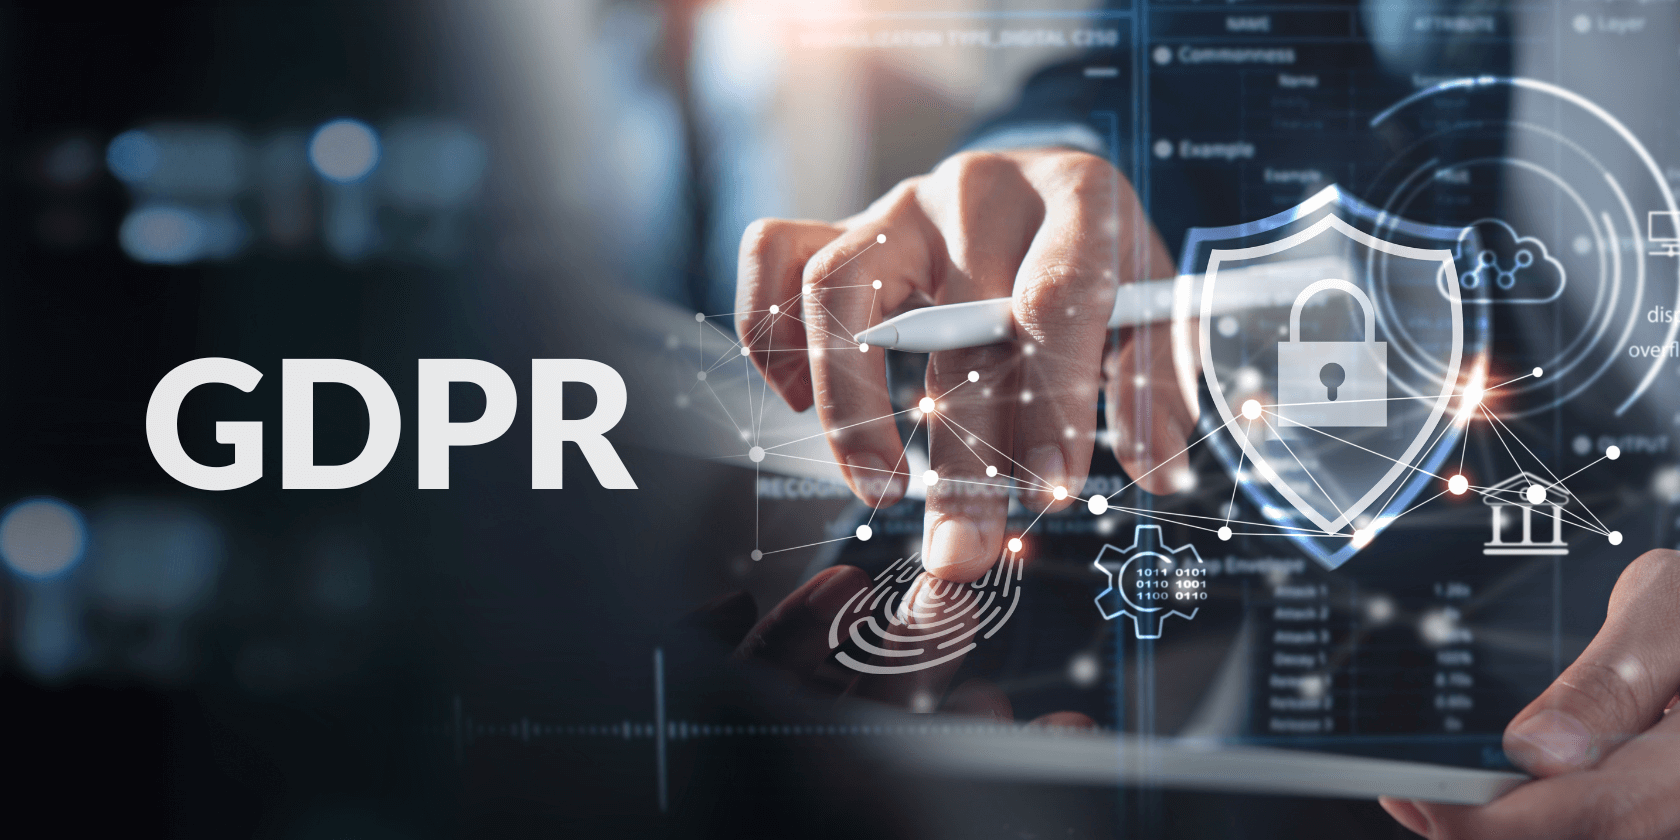 What Is the General Data Protection Regulation (GDPR)?